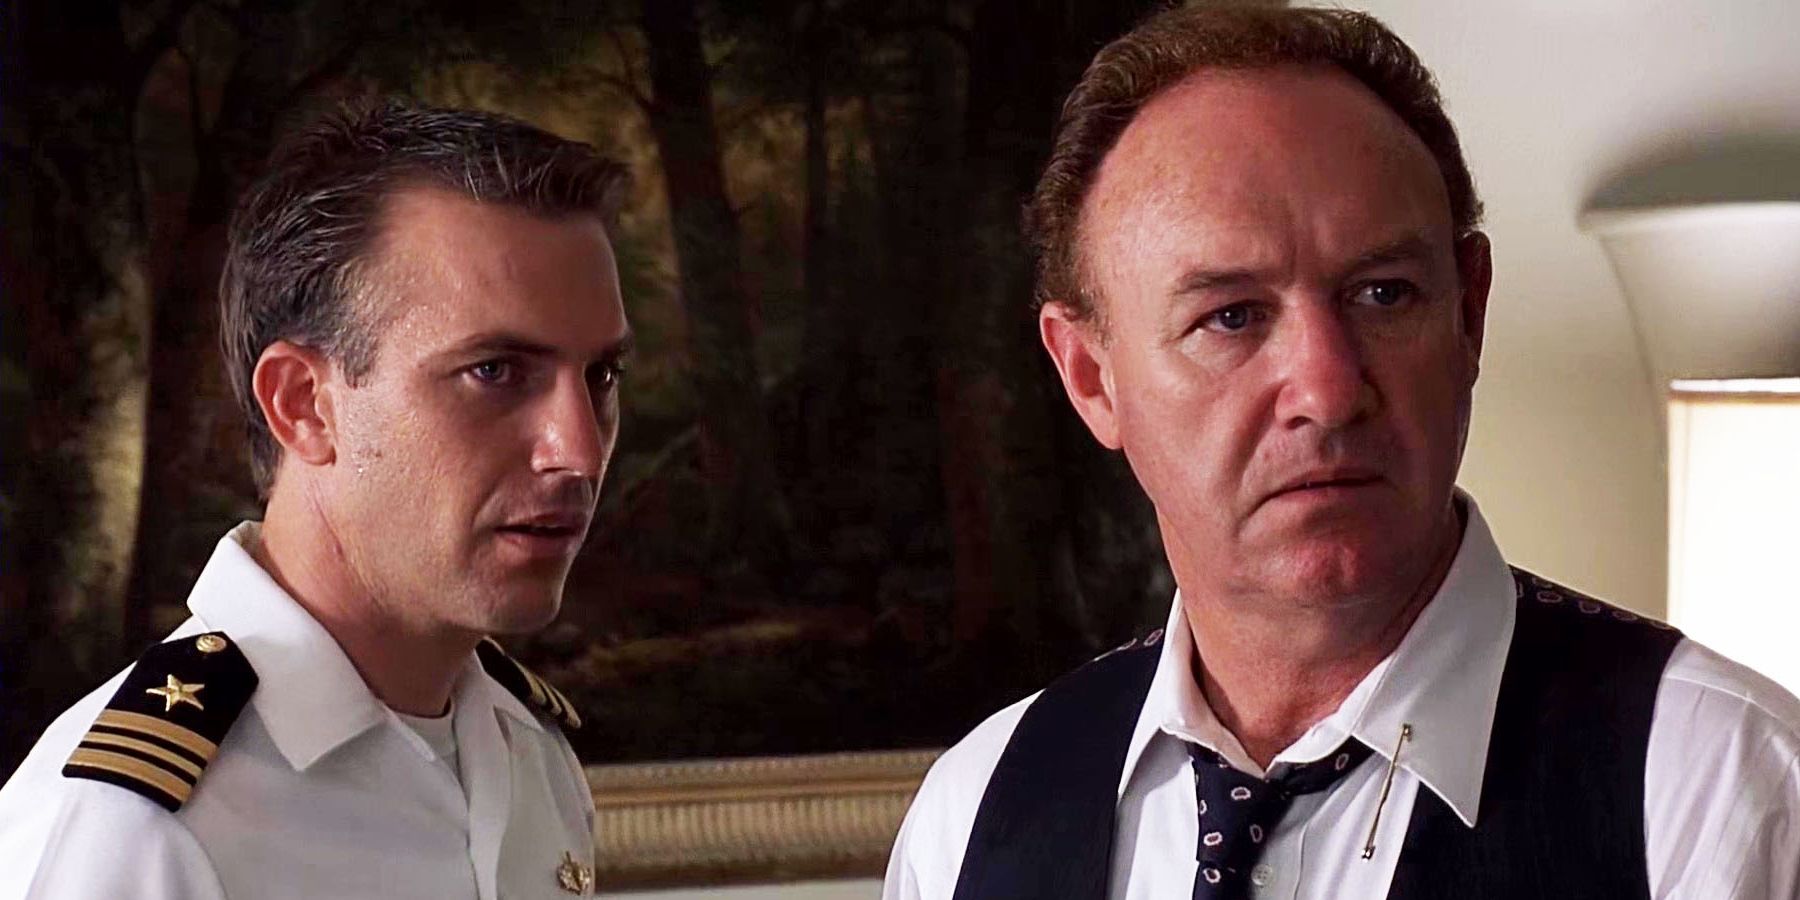 Kevin Costner and Gene Hackman as Tom Farrell and David Brice, in uniform and looking concerned at something offscreen in 'No Way Out'